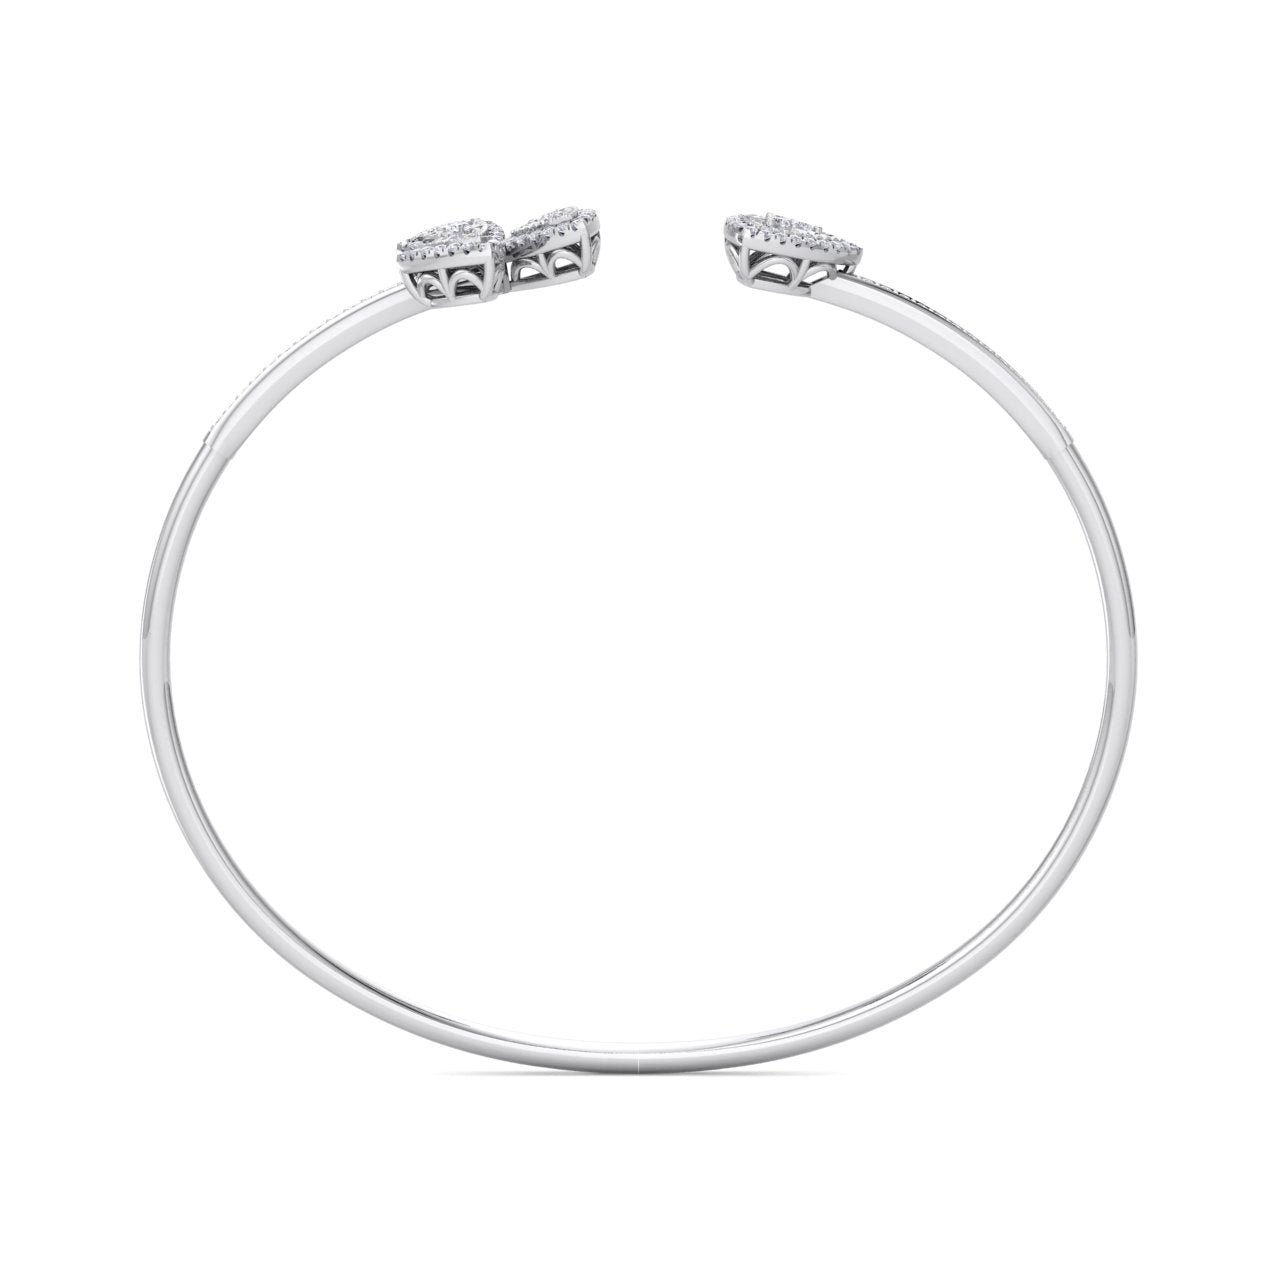 Bracelet in white gold with white diamonds of 0.53 ct in weight